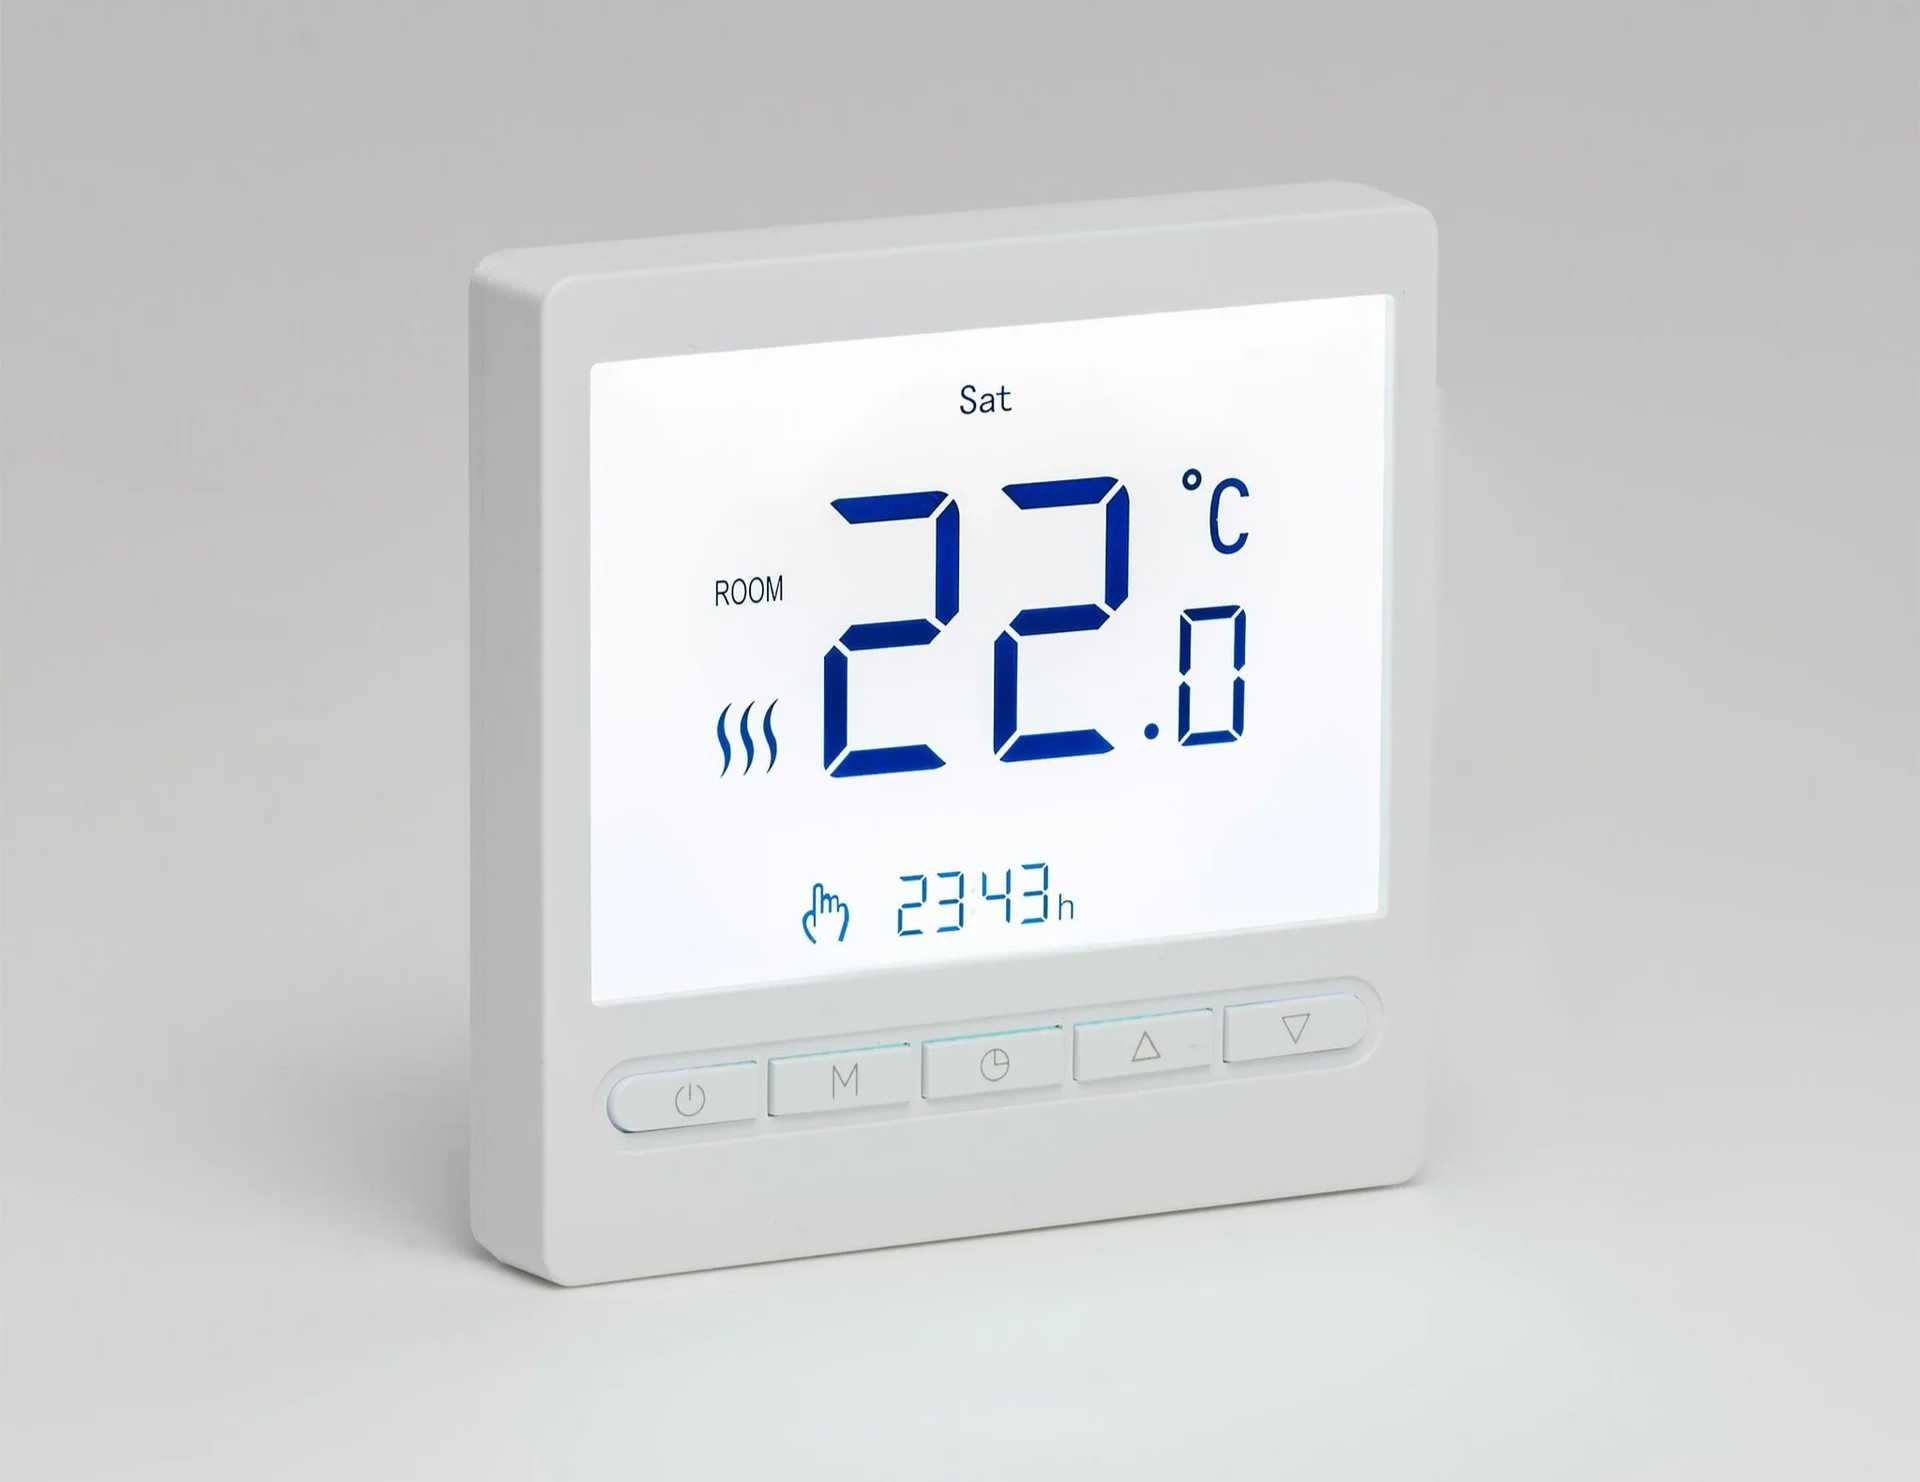 Thermostats, Suuwer 5-1-1 Day Programmable Thermostat for Home, up to 2  Heat/ 2 Cool